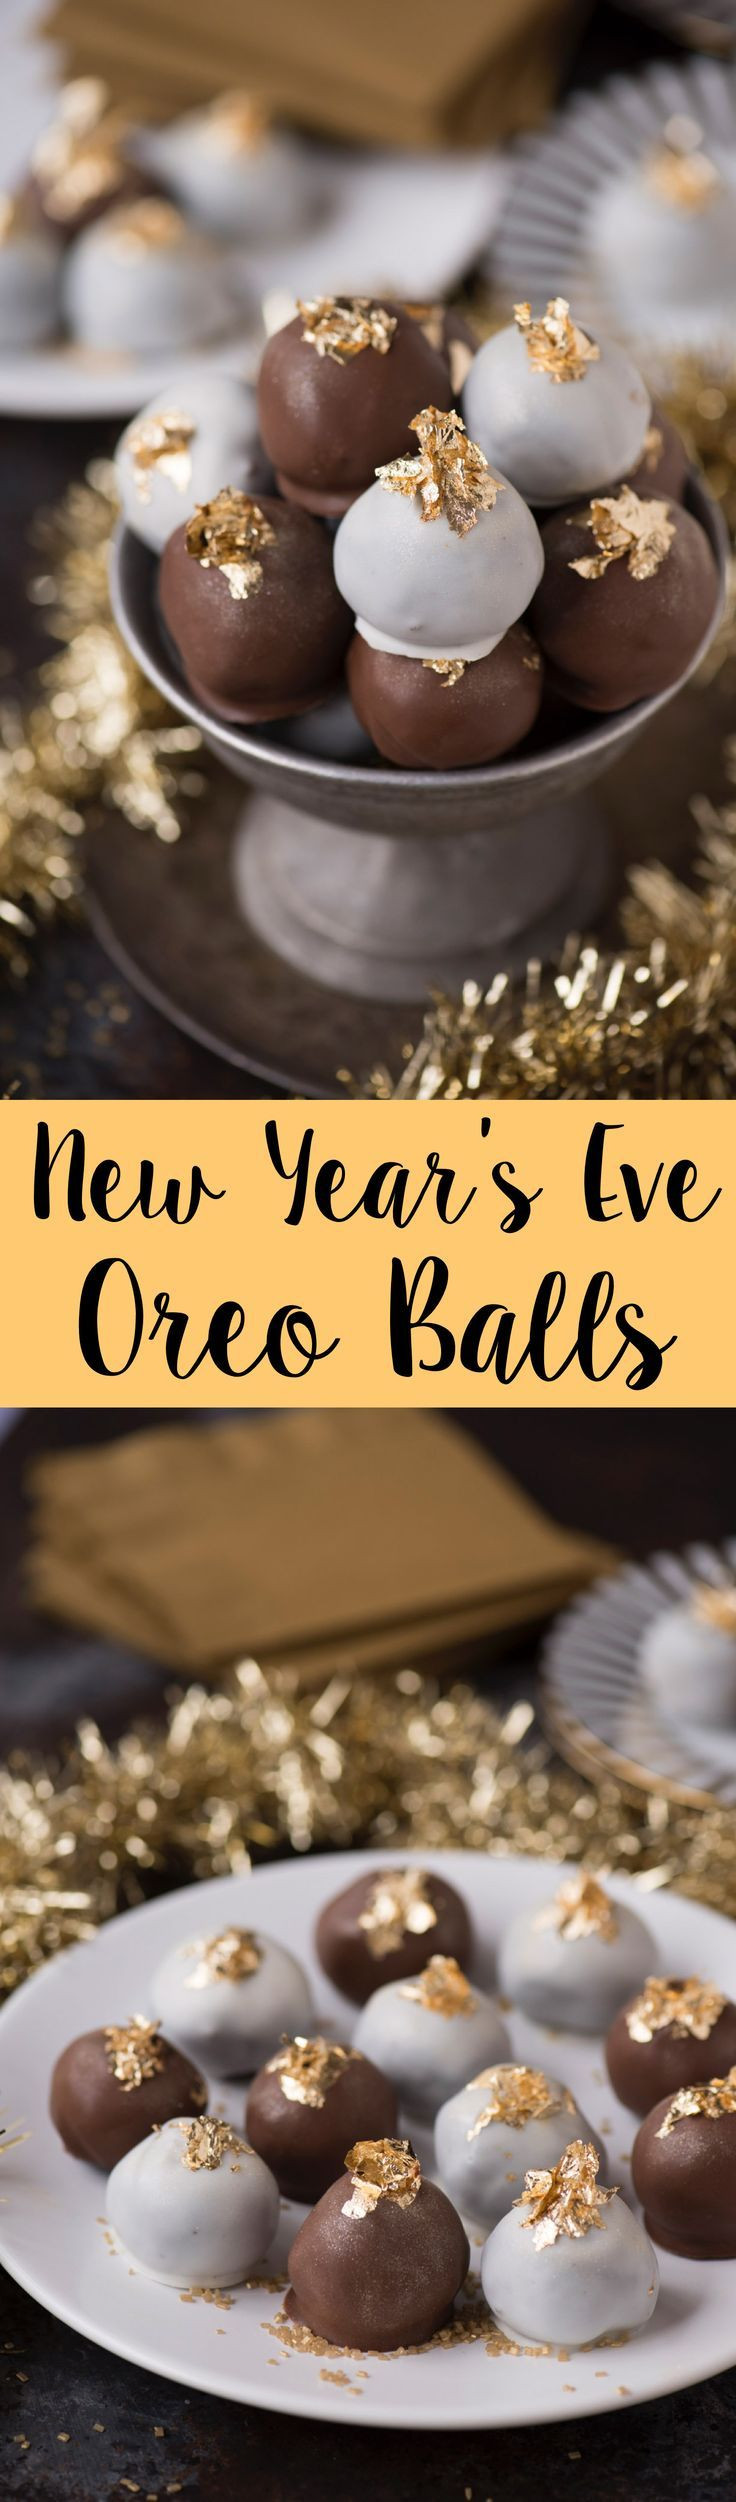 Mini Desserts New Year'S Eve
 Gold and glittery New Year’s Eve oreo balls Dipped in